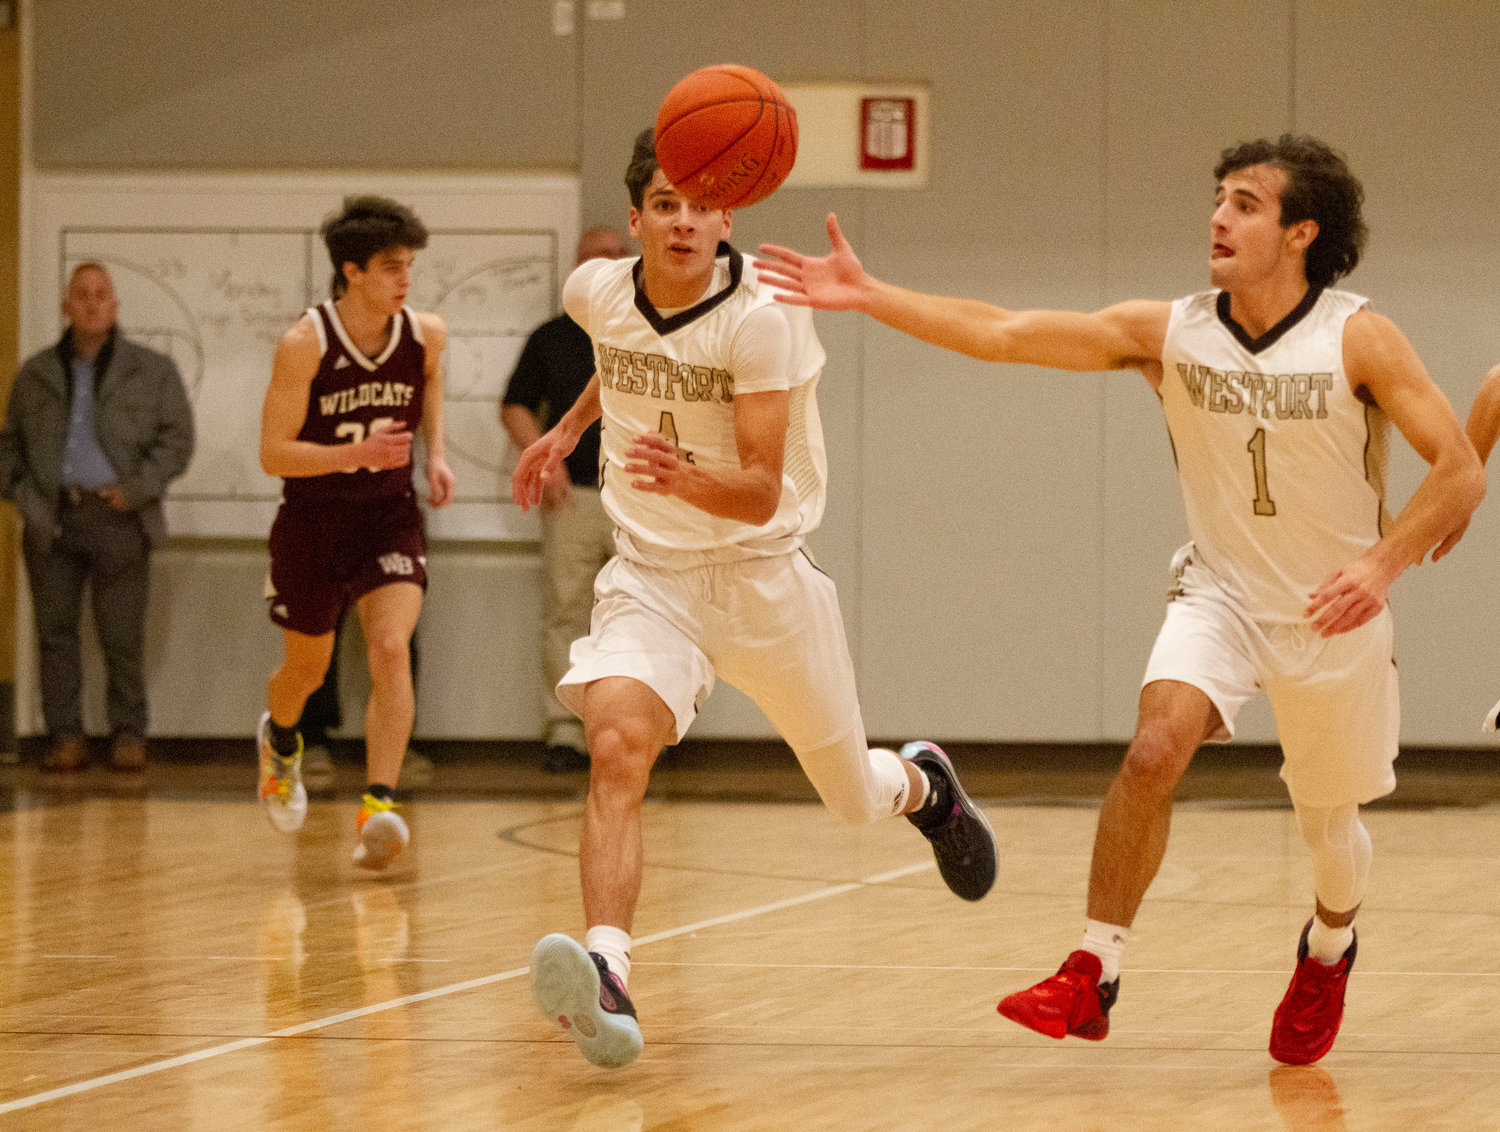 Owen Boudria (left) looks on as Hunter Brodeur makes a steal and heads up court on a fast break.